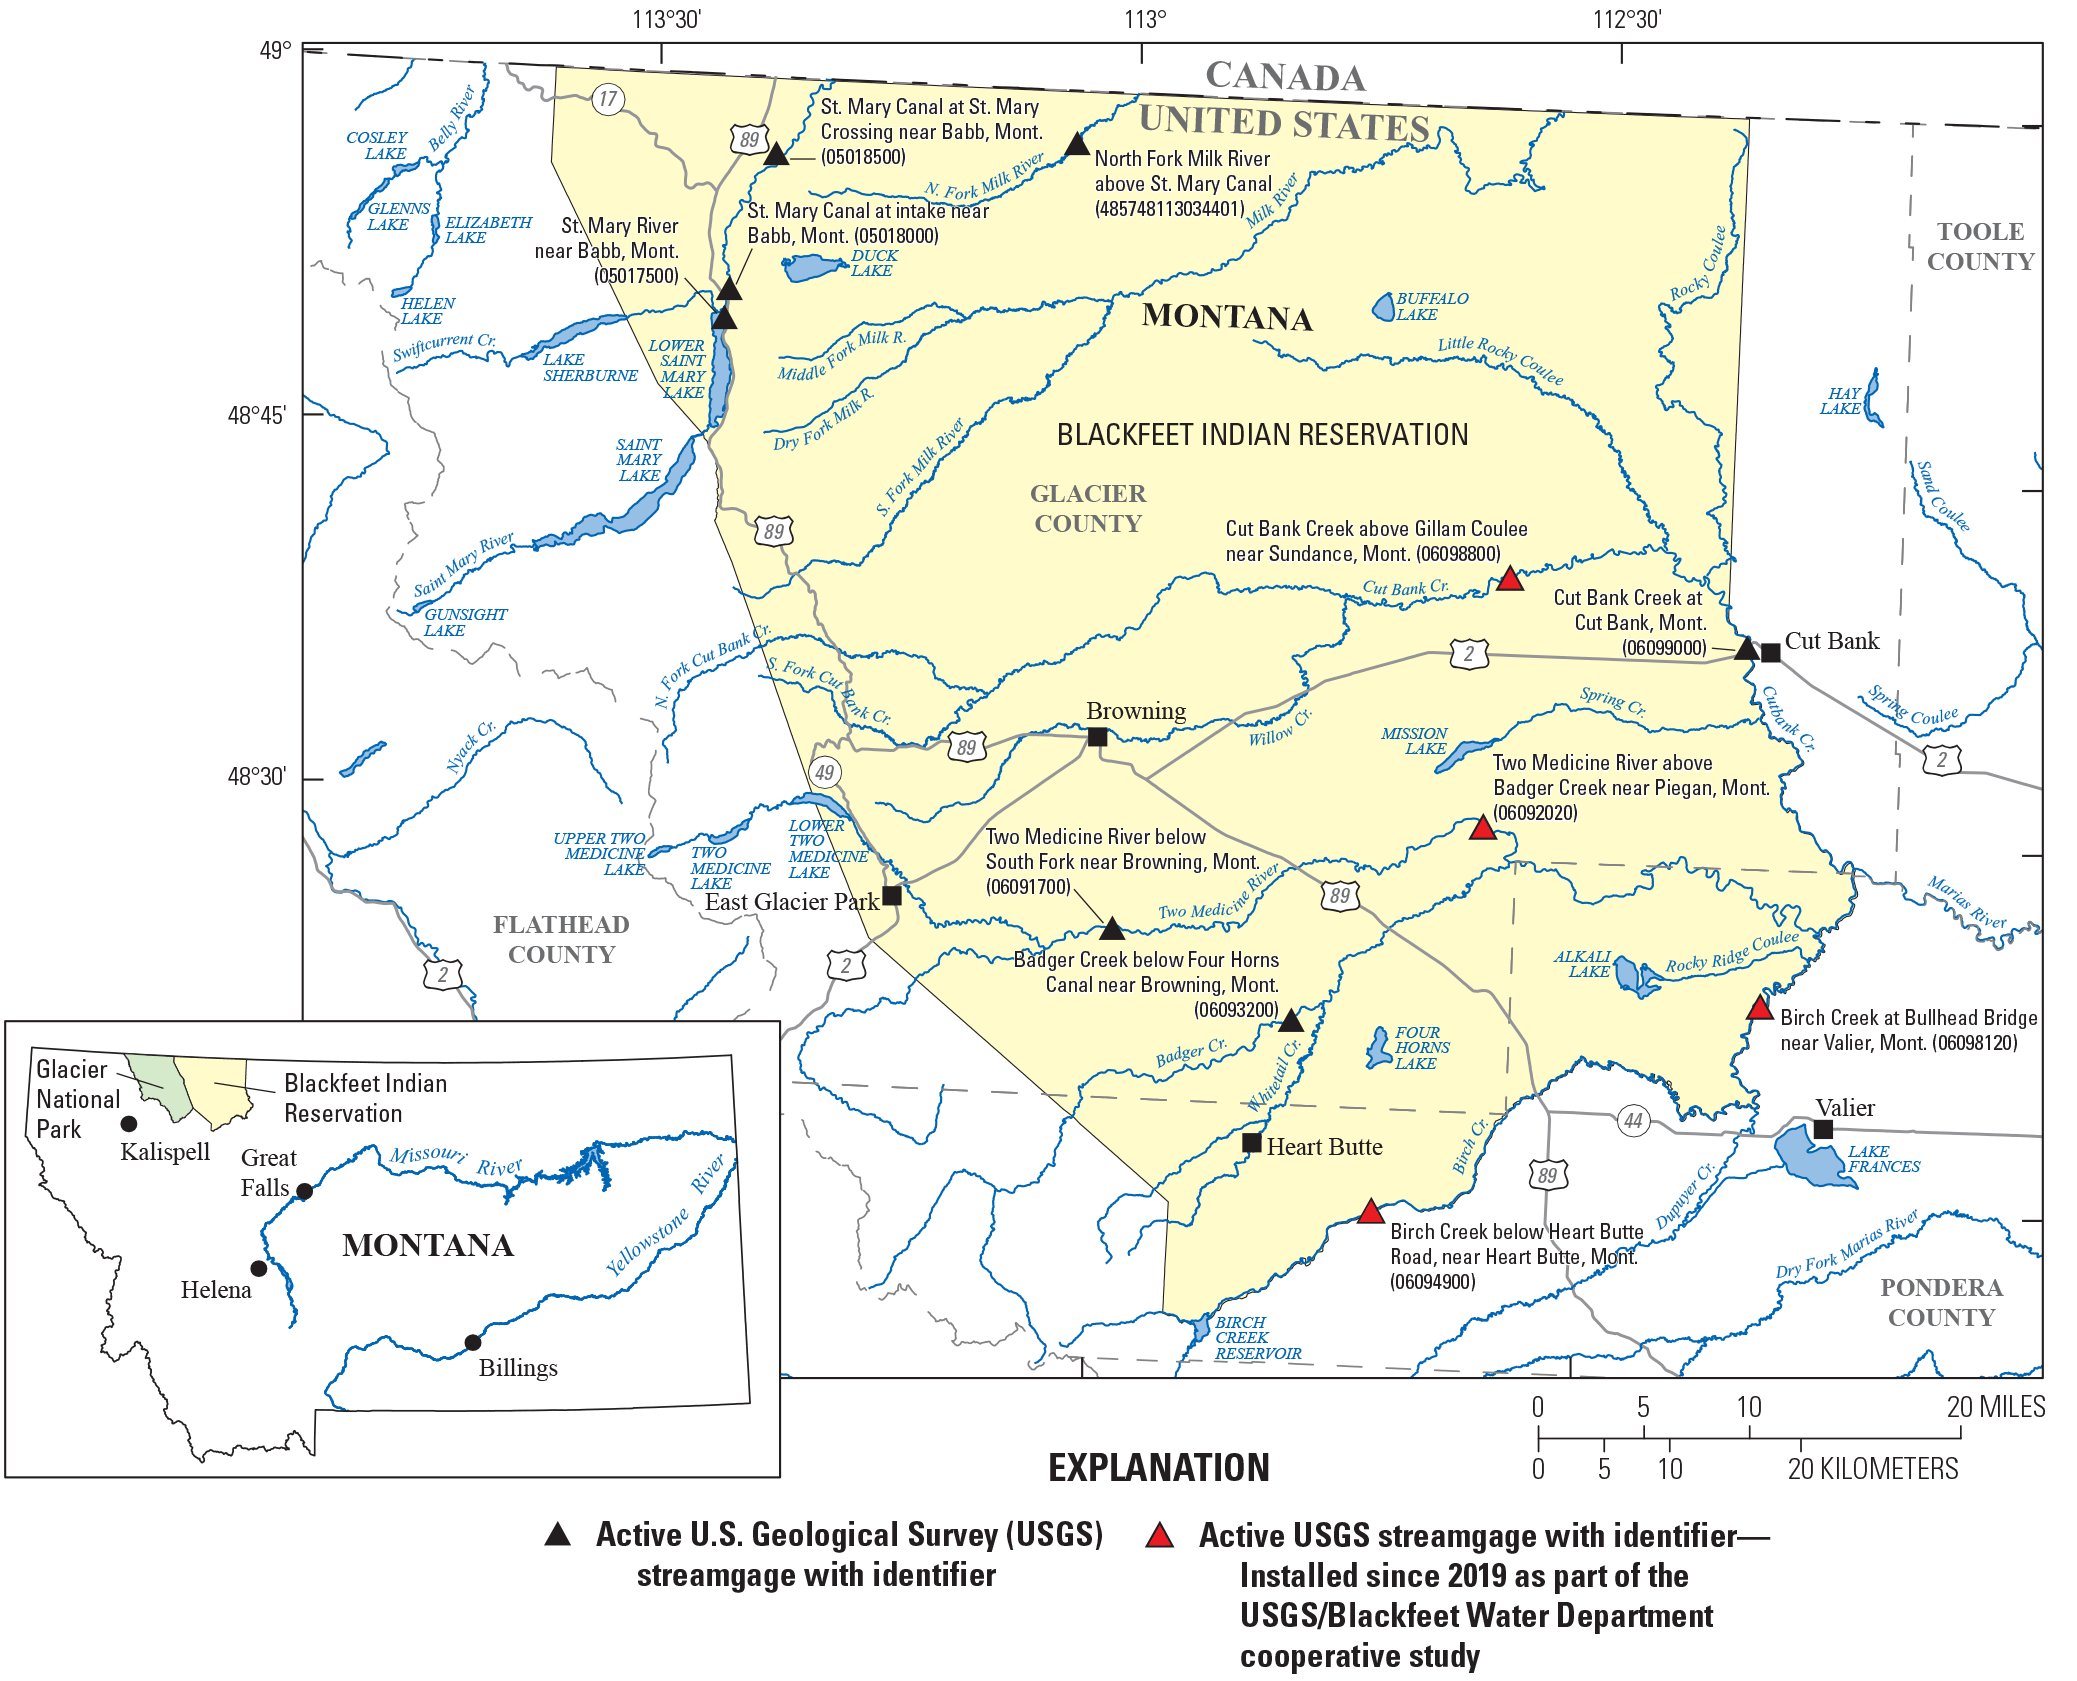 Figure 1. Map showing location of streamgages on the Blackfeet Indian Reservation
                     of Montana.